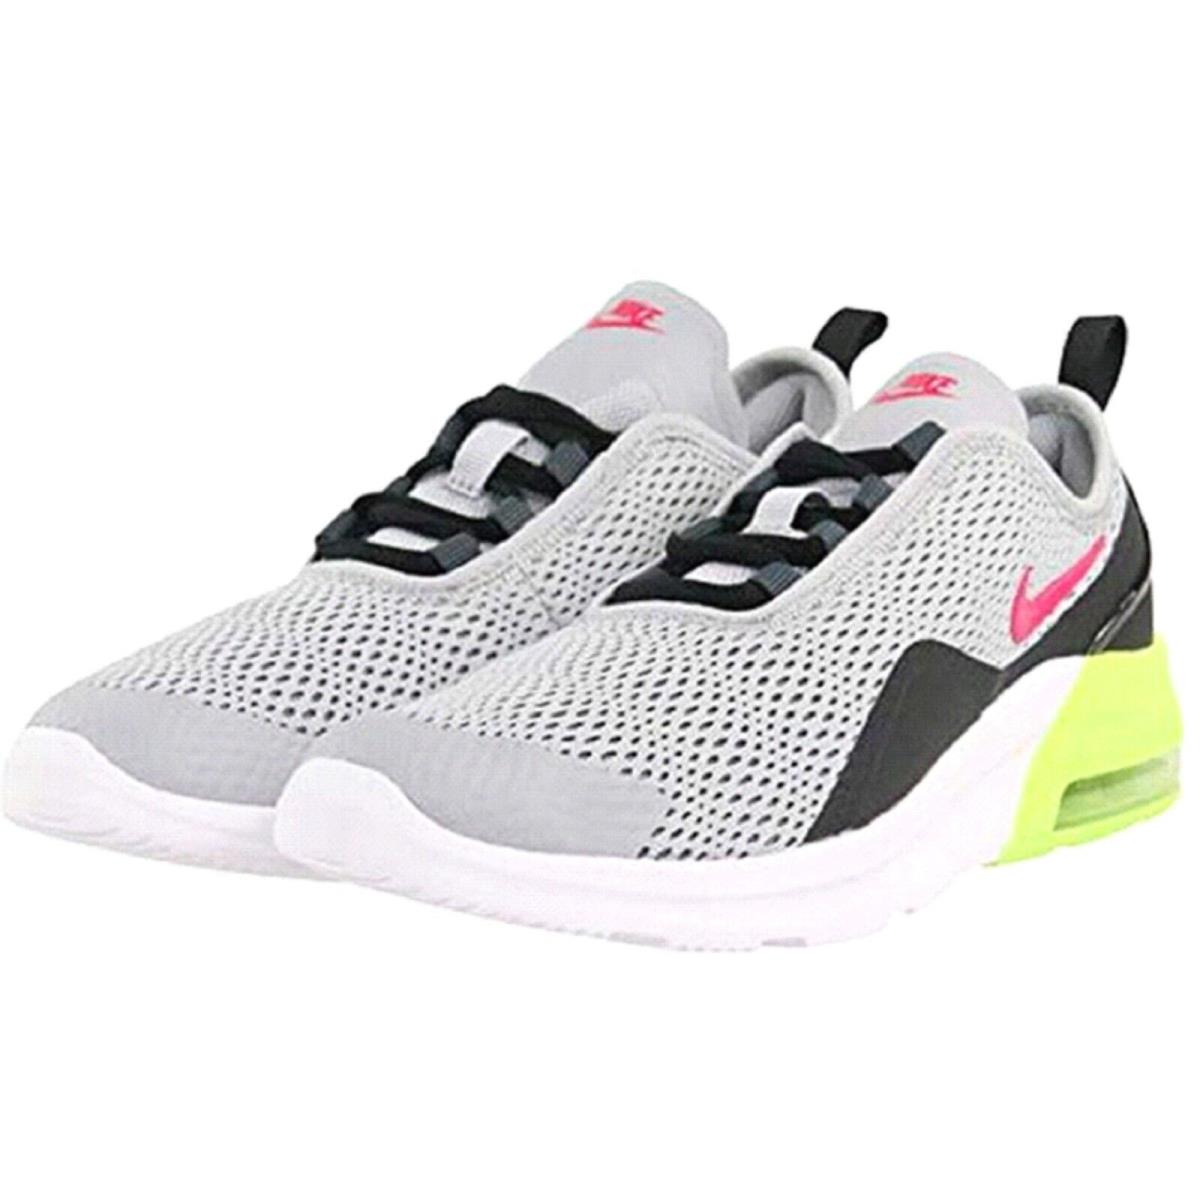 Nike shoes Air Max Motion - Wolf Grey/Rush Pink/Anthracite 0